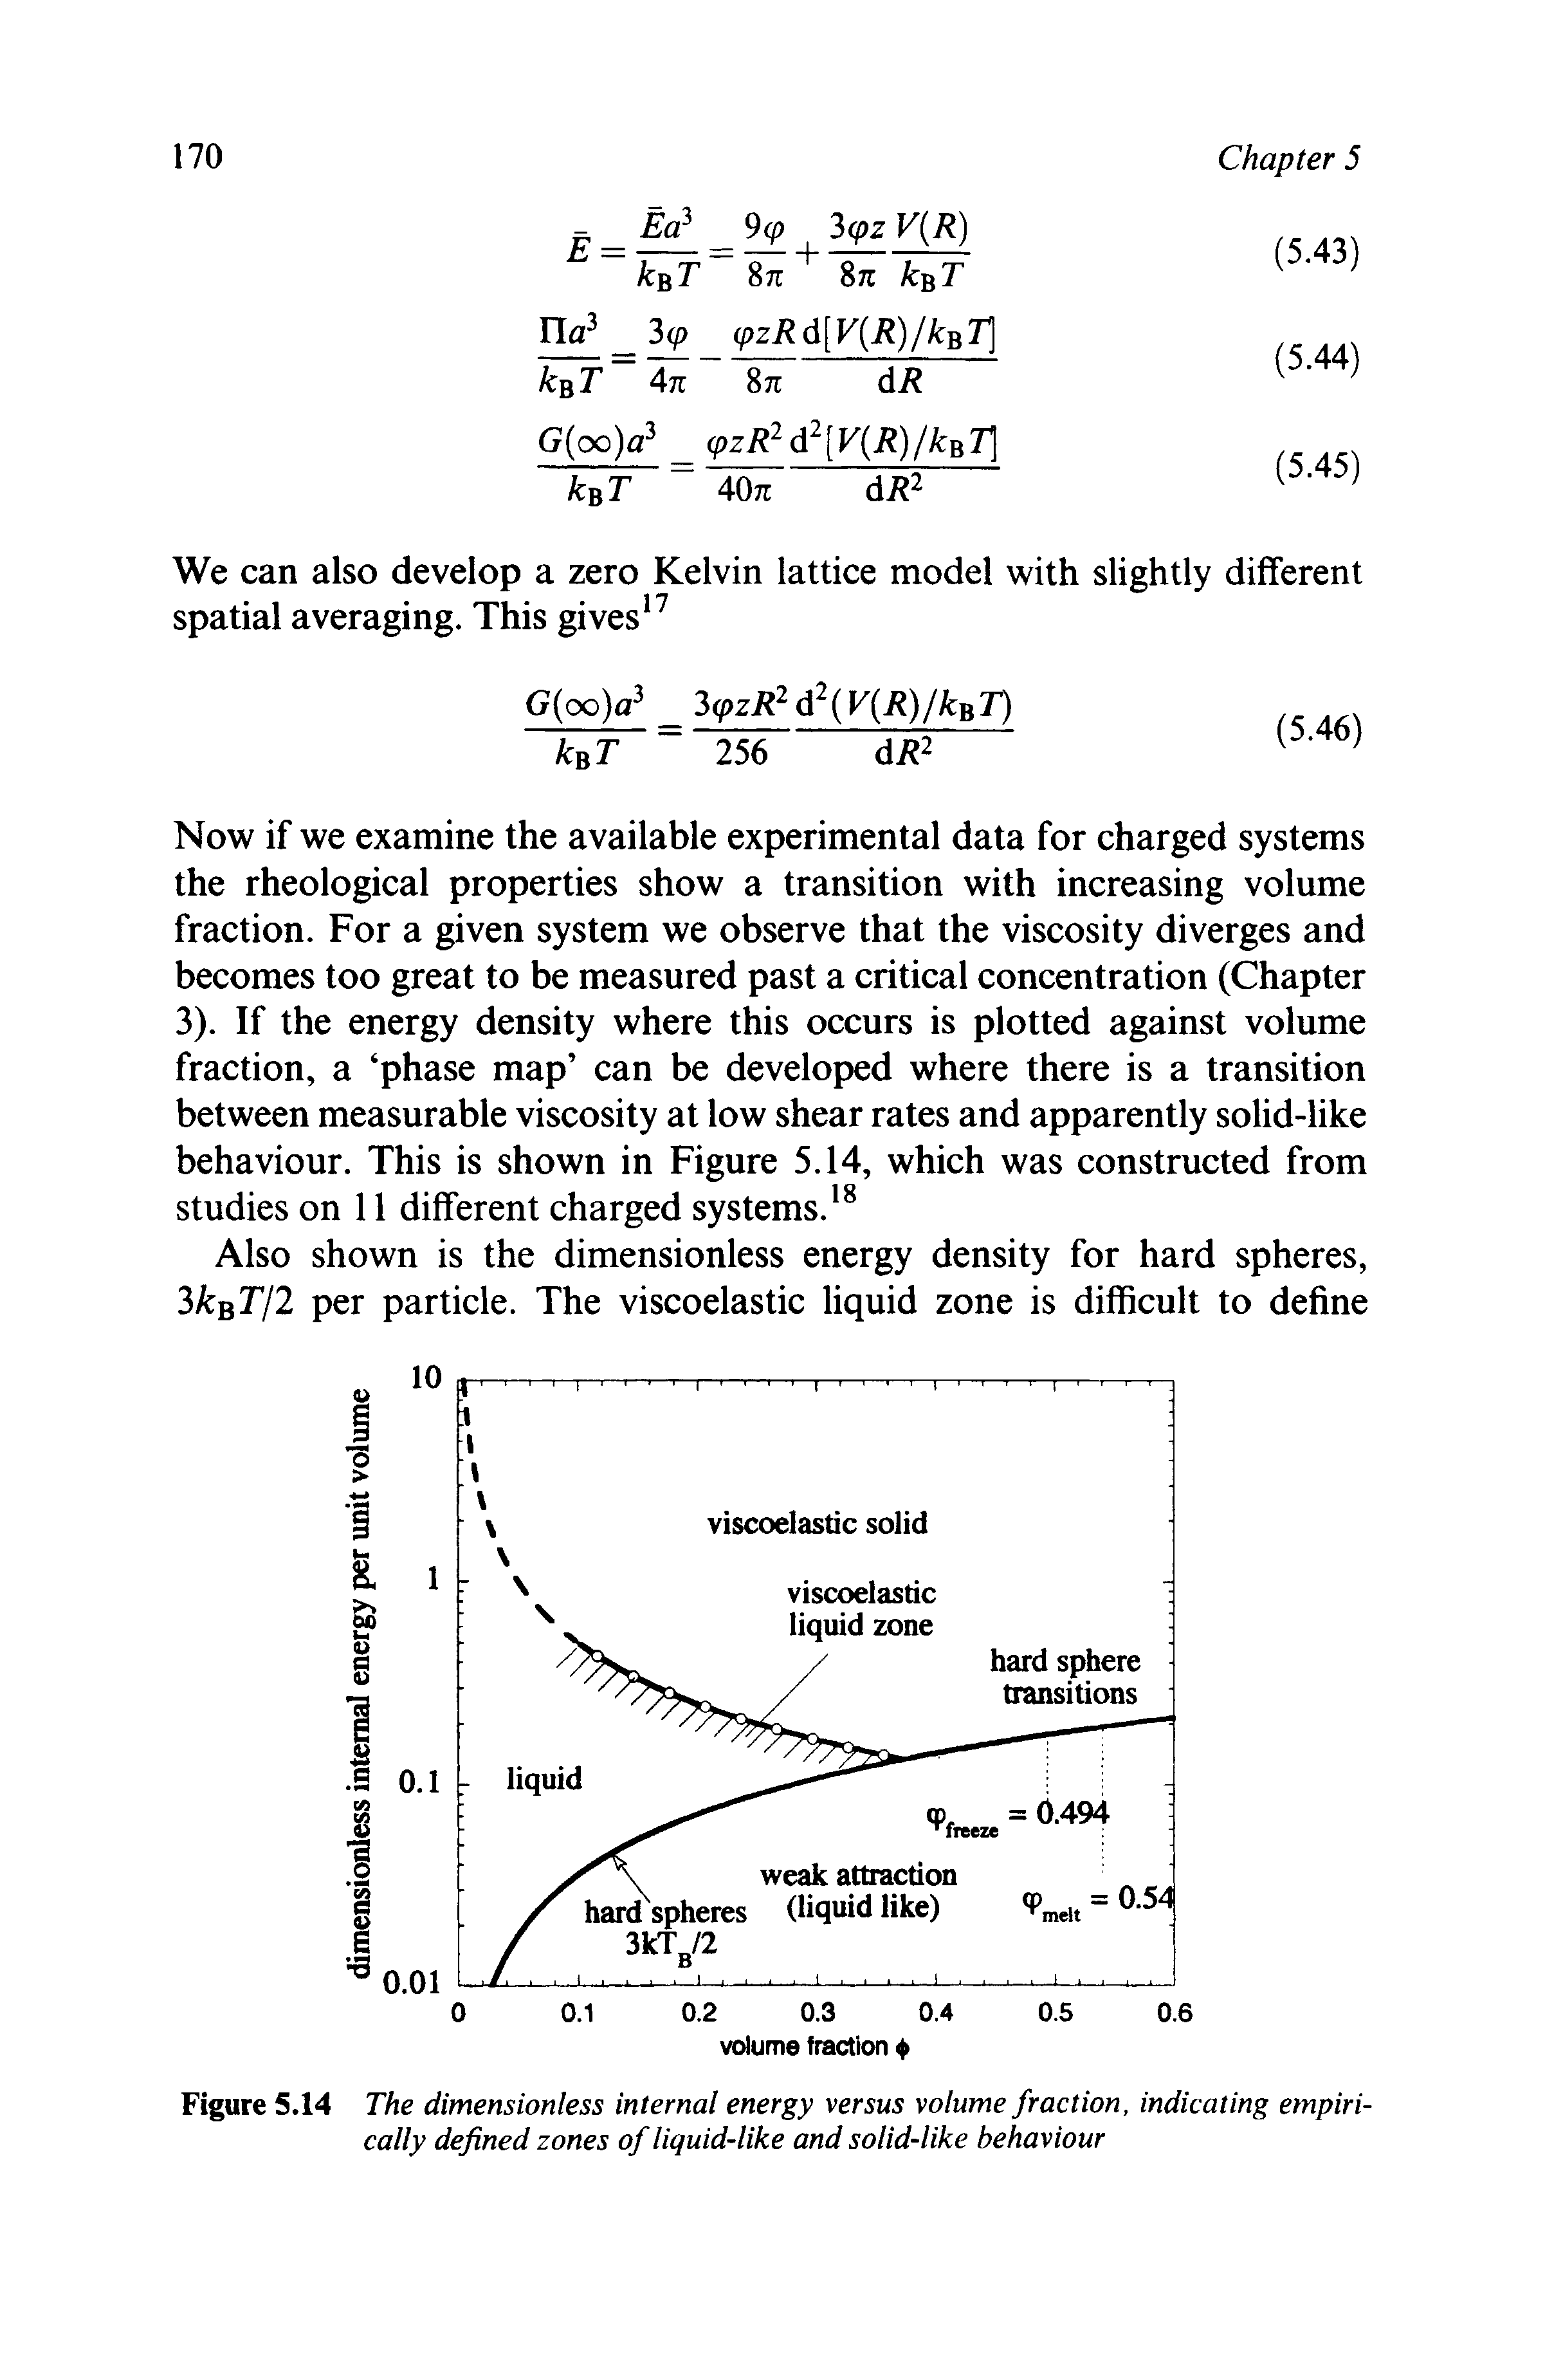 Figure 5.14 The dimensionless internal energy versus volume fraction, indicating empirically defined zones of liquid-like and solid-like behaviour...